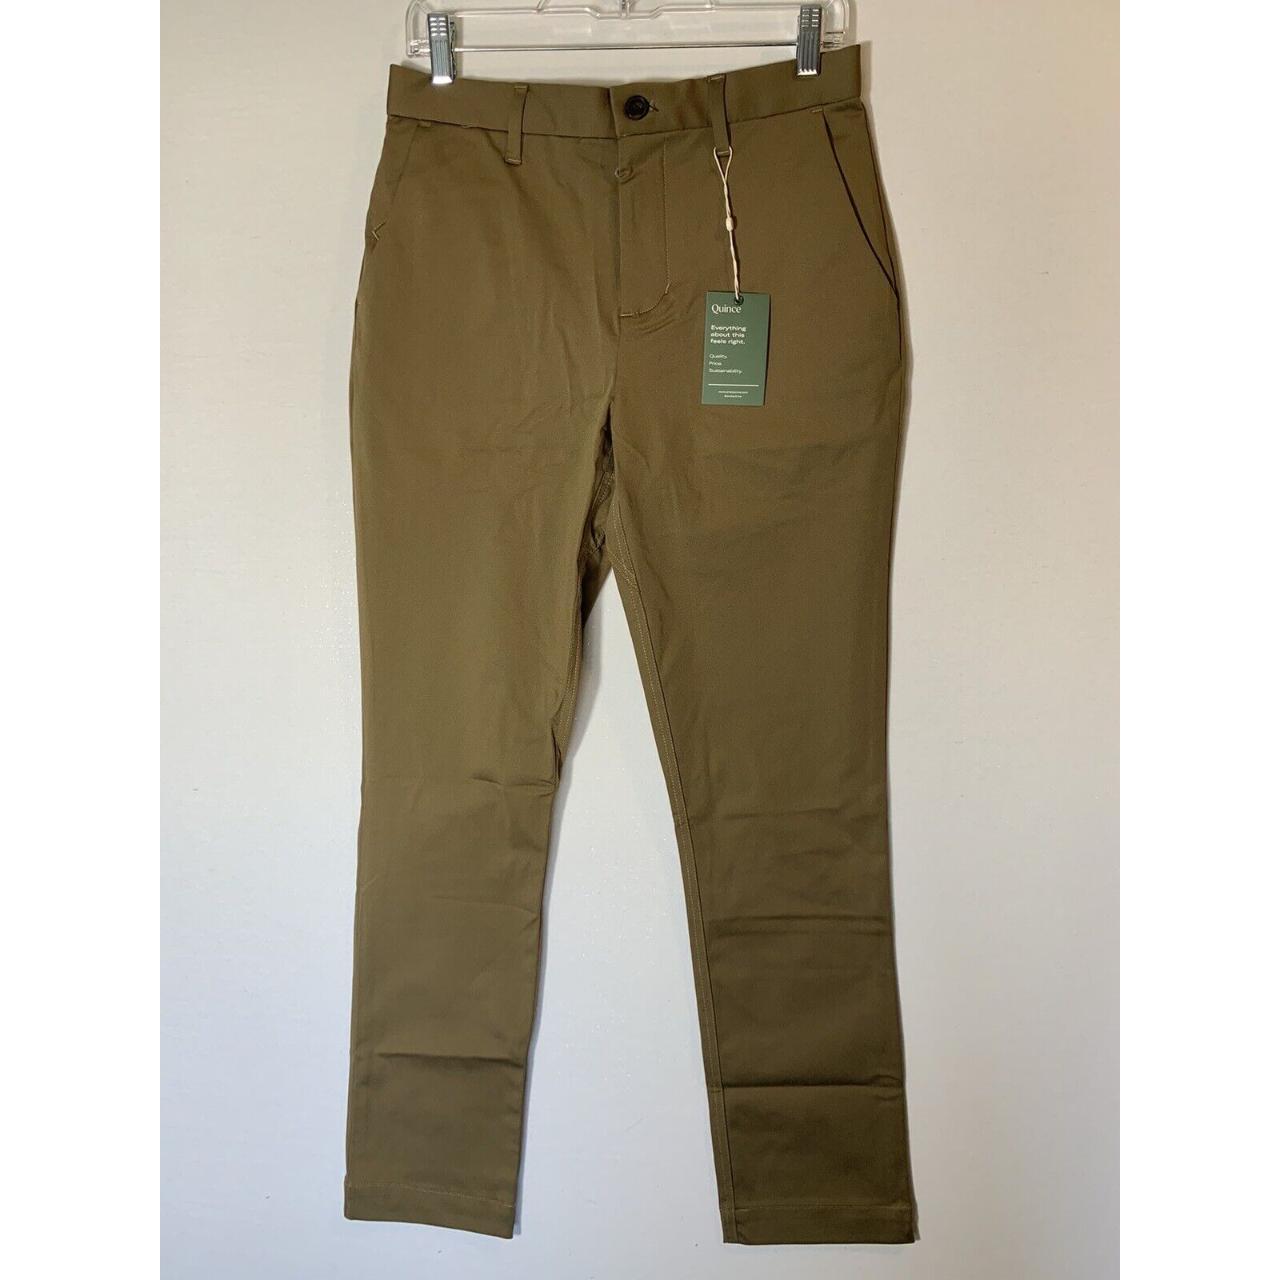 Quince Men's Recycled Comfort Tech Chino Pants Olive - Depop